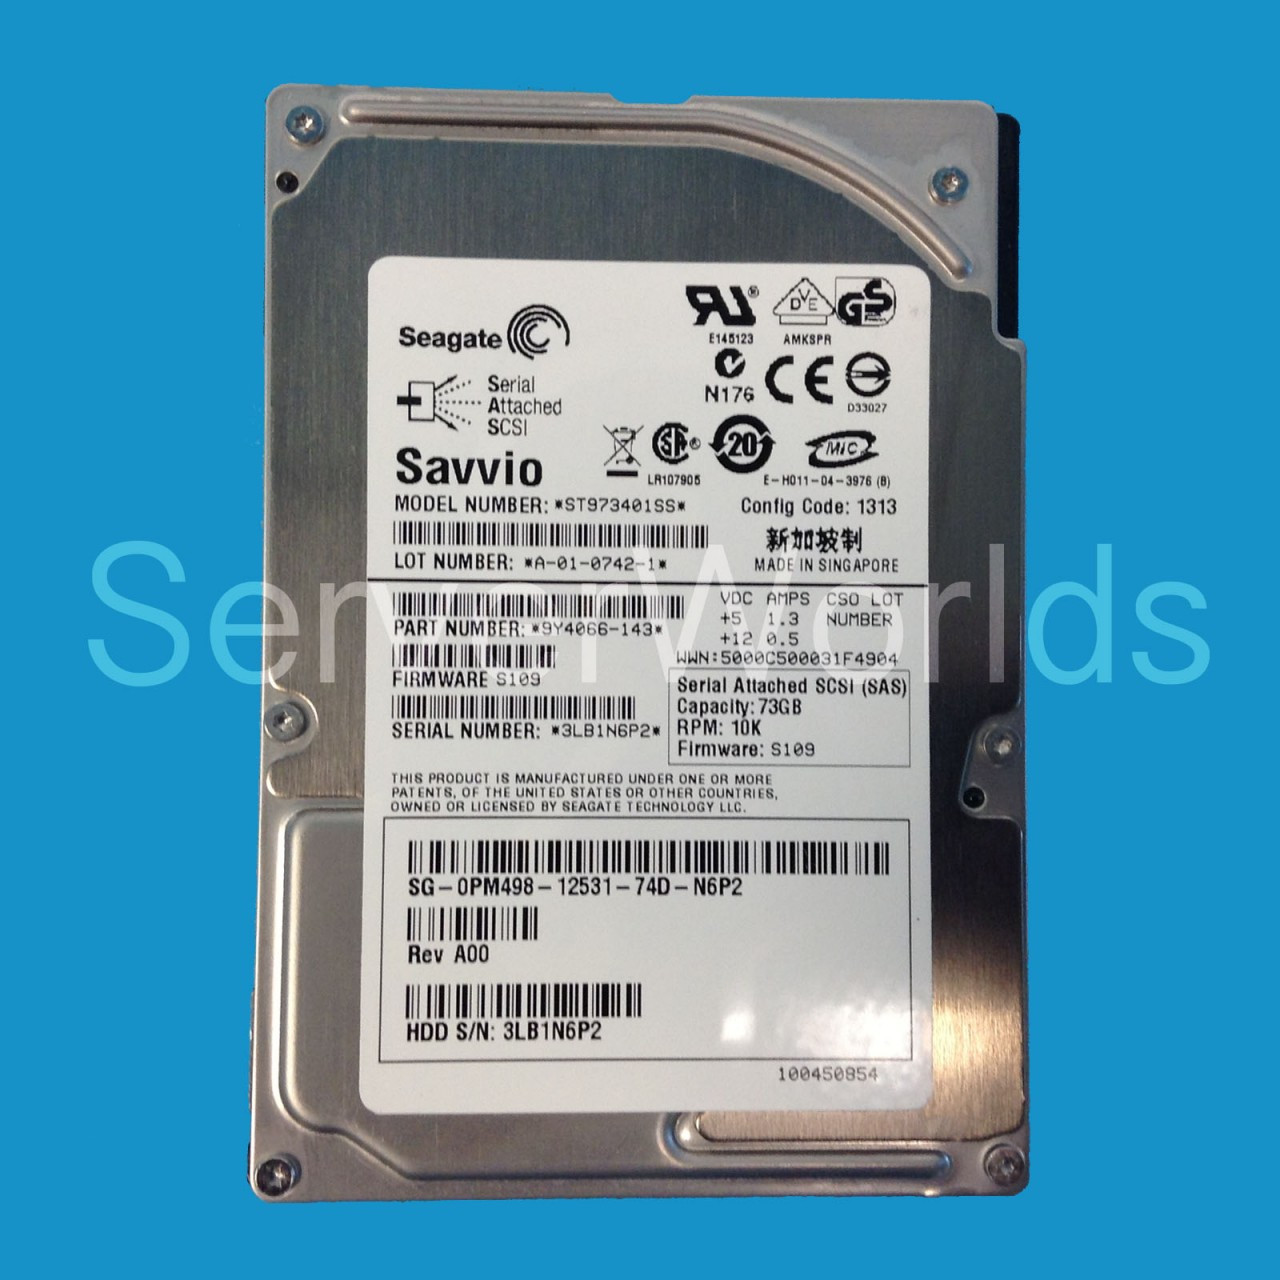 Dell PM498 73GB SAS 10K 3GBPS 2.5" Drive 9Y4066-143 ST973401SS